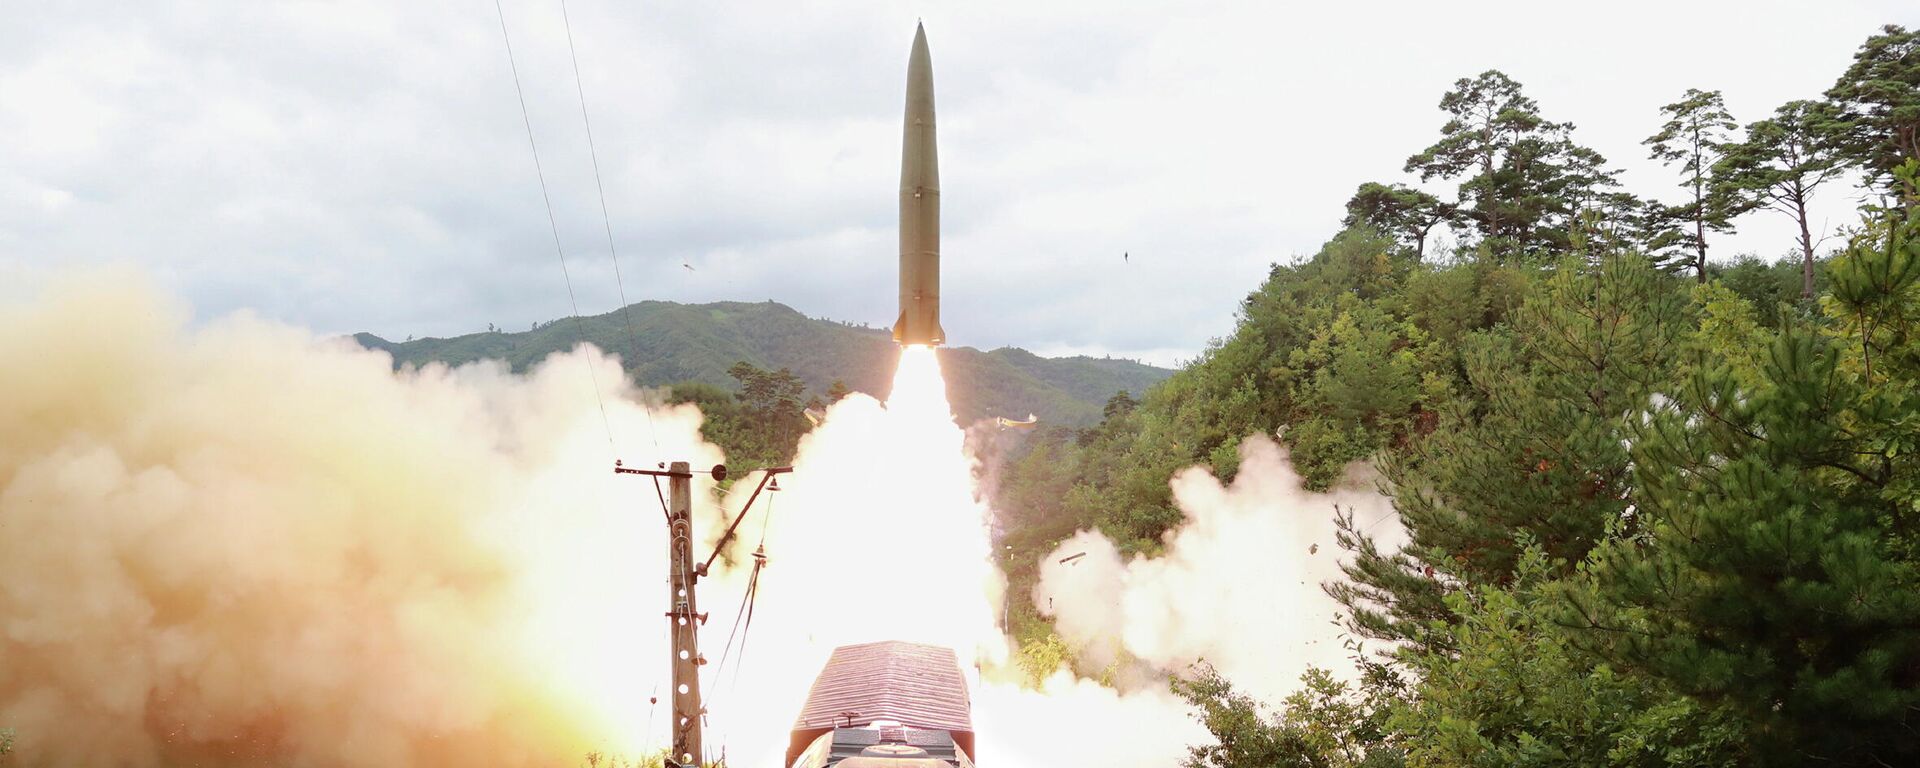 A missile is seen launched during a drill of the Railway Mobile Missile Regiment in North Korea, in this image supplied by North Korea's Korean Central News Agency on September 16, 2021 - Sputnik International, 1920, 16.09.2021